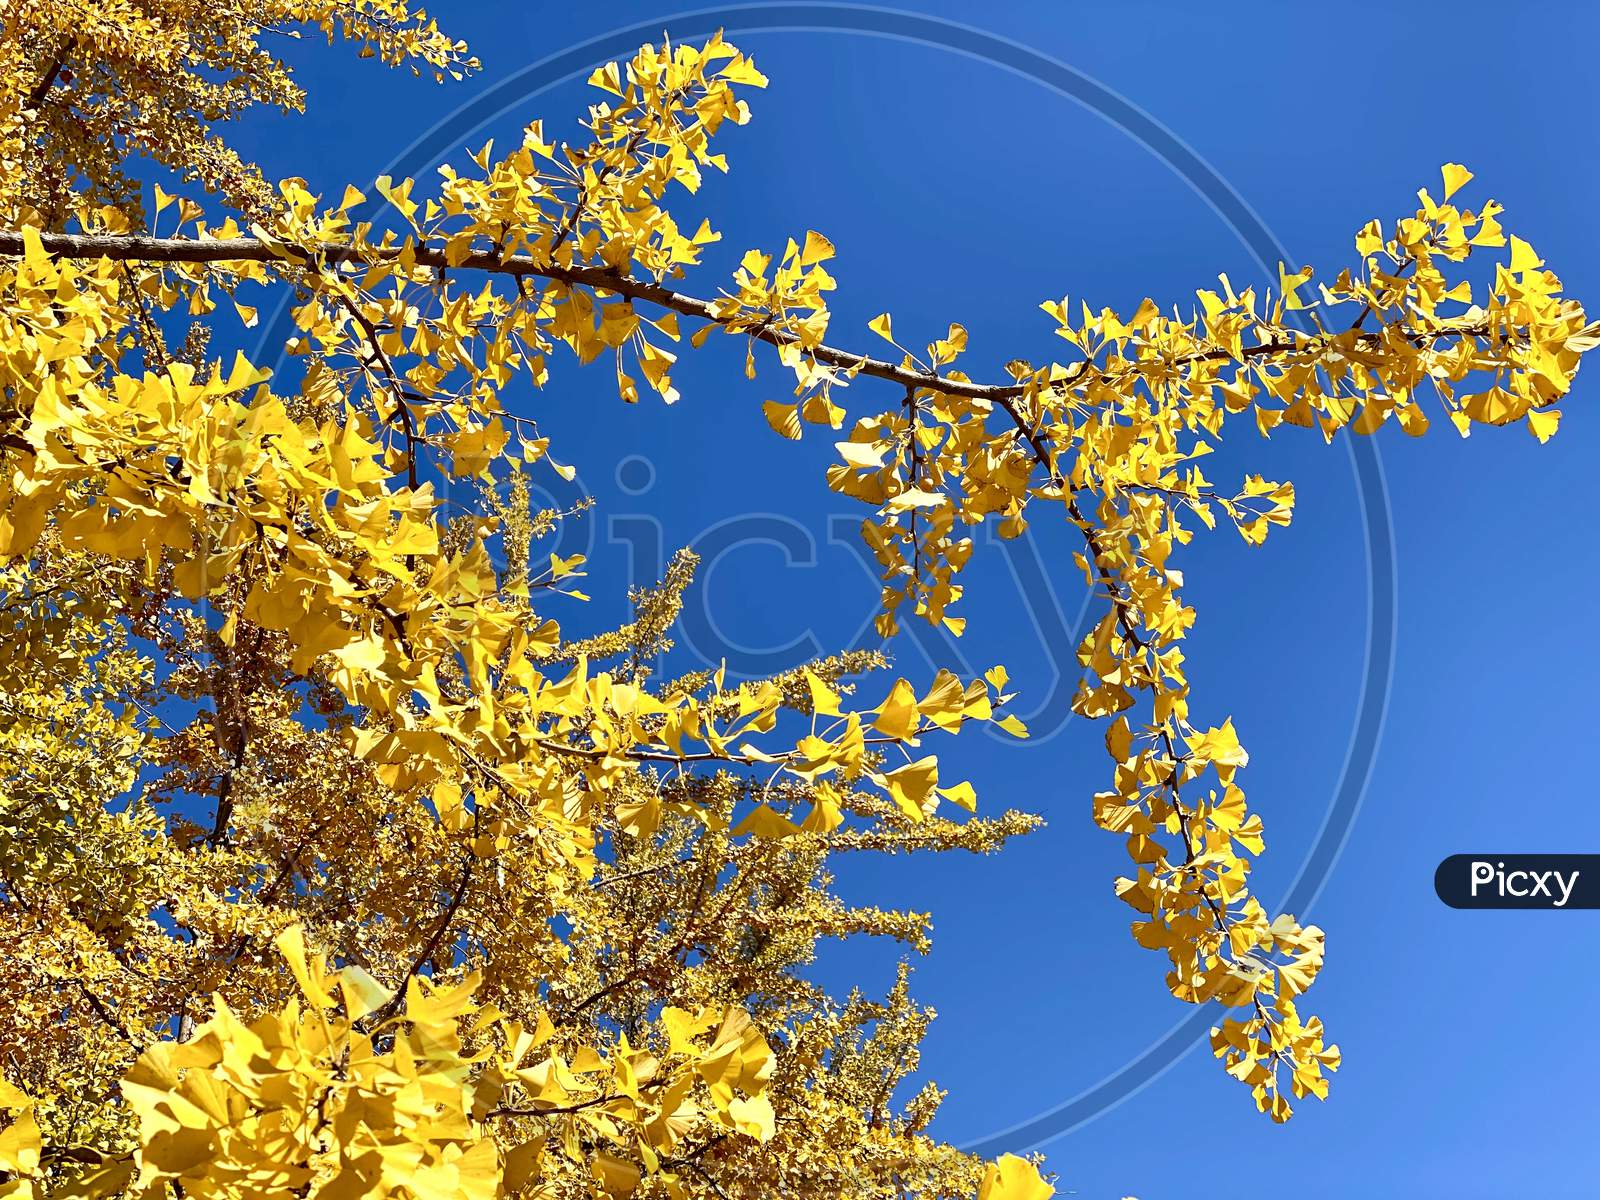 Blue Sky and yellow leaves of Autumn